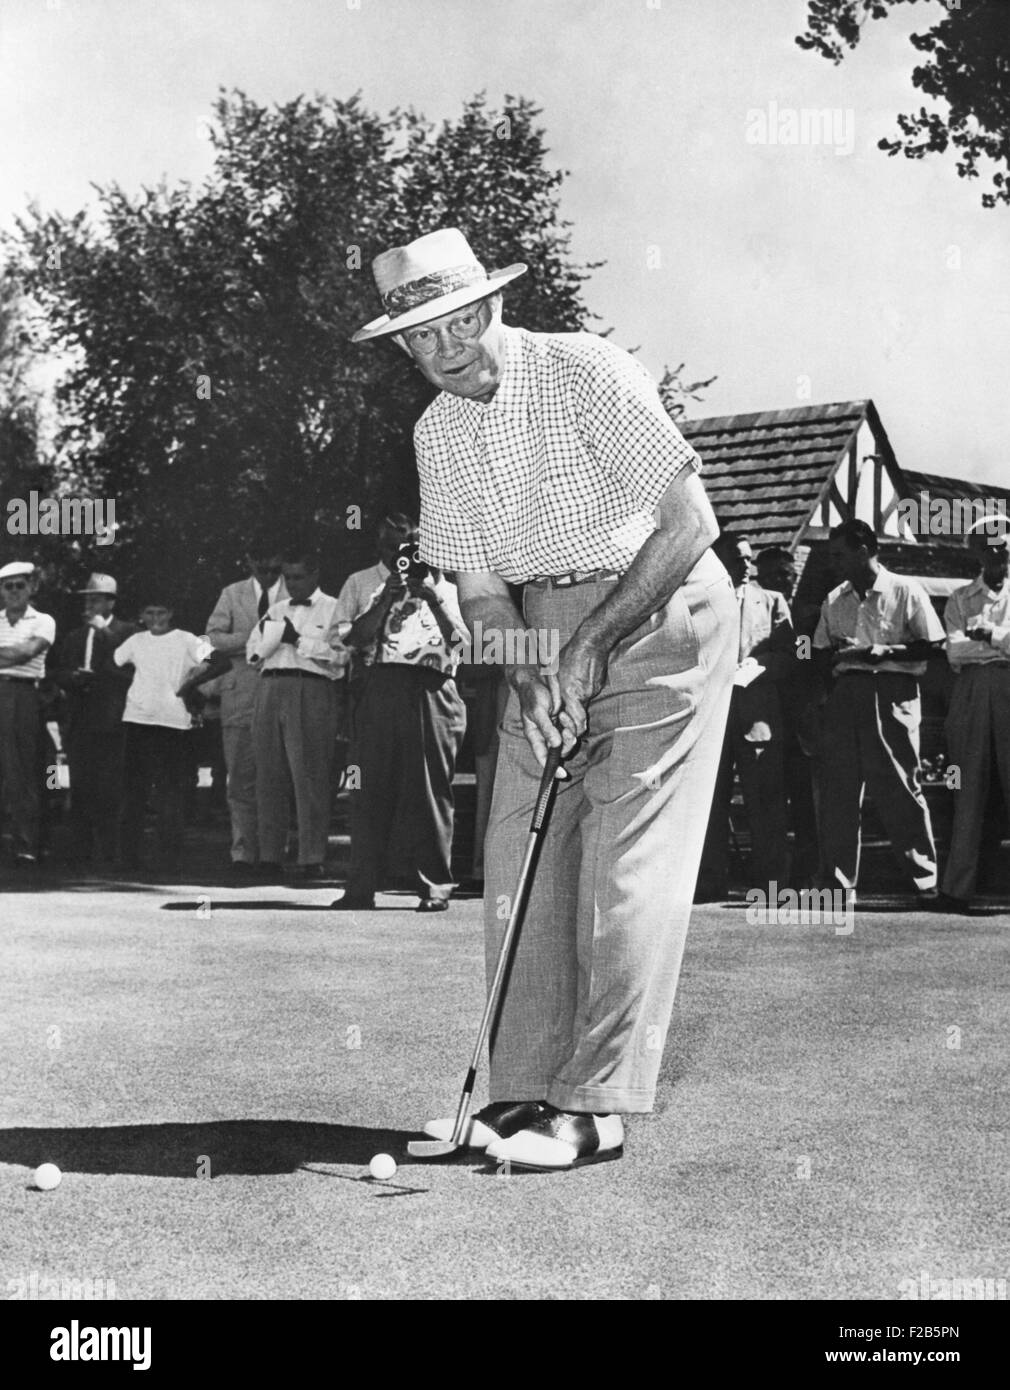 President Dwight Eisenhower on a golf course putting green. Sept. 1953. - (BSLOC 2014 16 97) Stock Photo